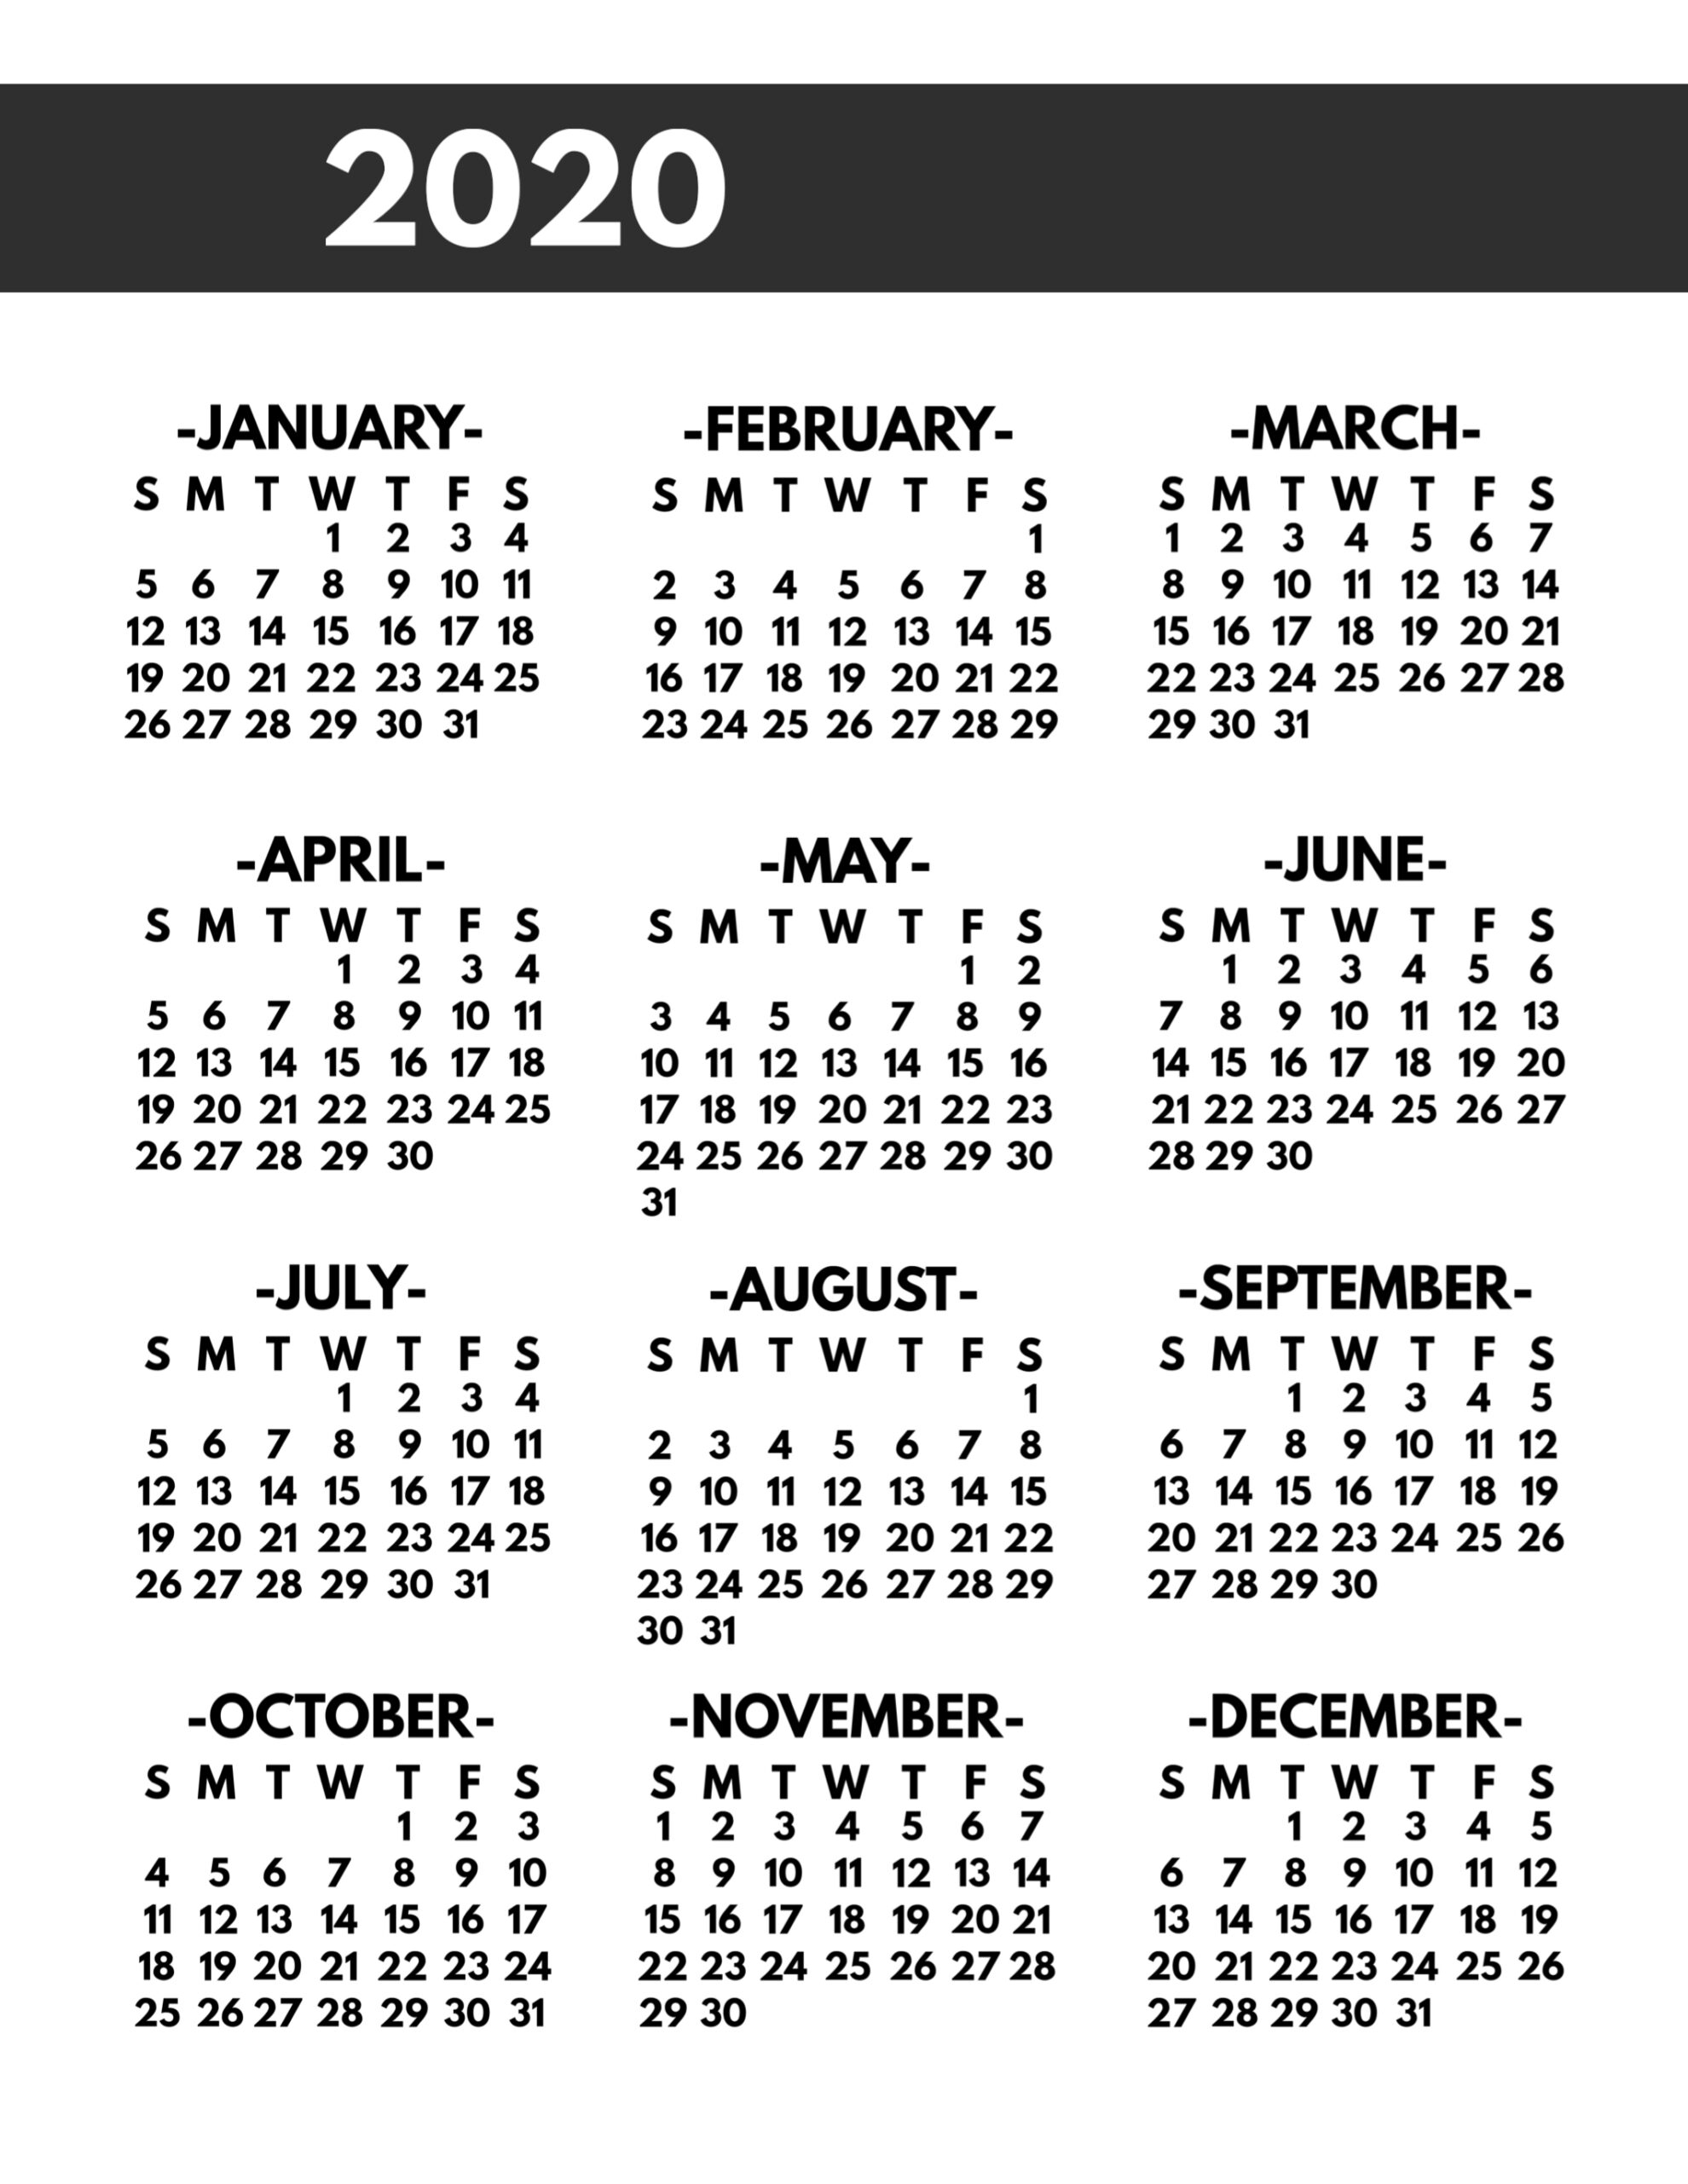 2020 Printable One Page Year At A Glance Calendar | Paper throughout Free 2020 Calendar At A Glance